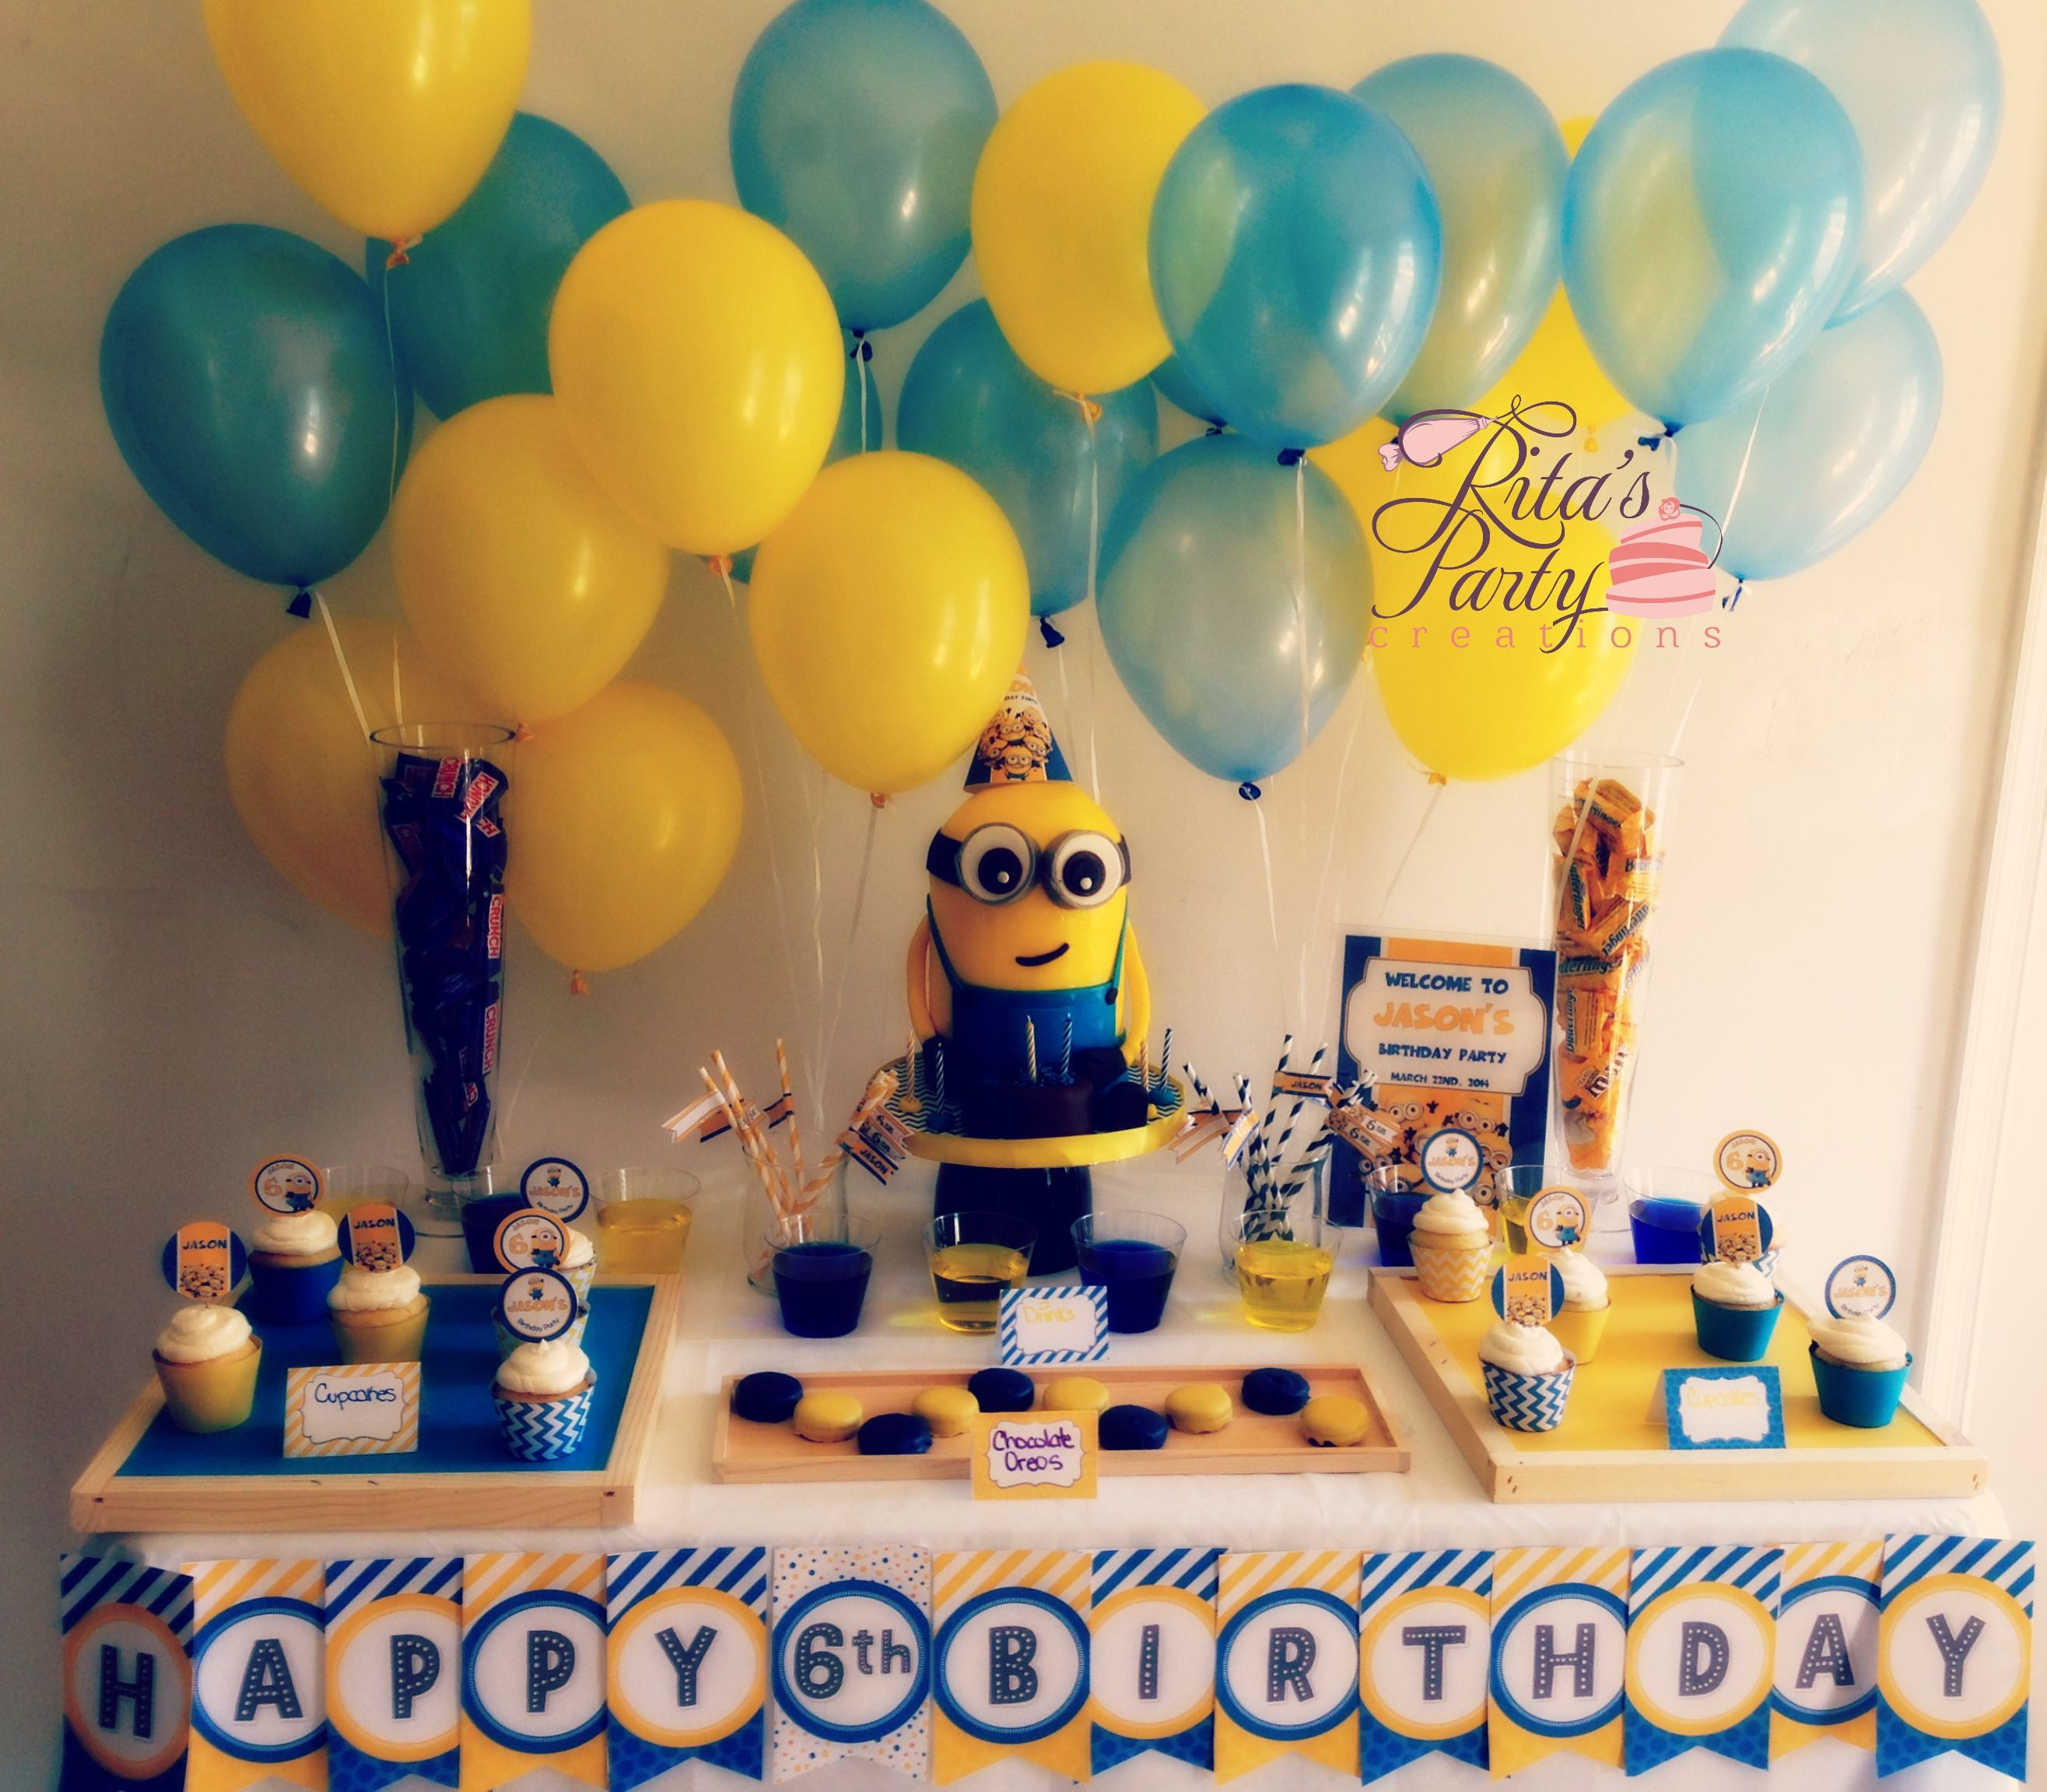 2 Year Old Boy Birthday Party Ideas
 despicable me party table for a 6 year old boy birthday